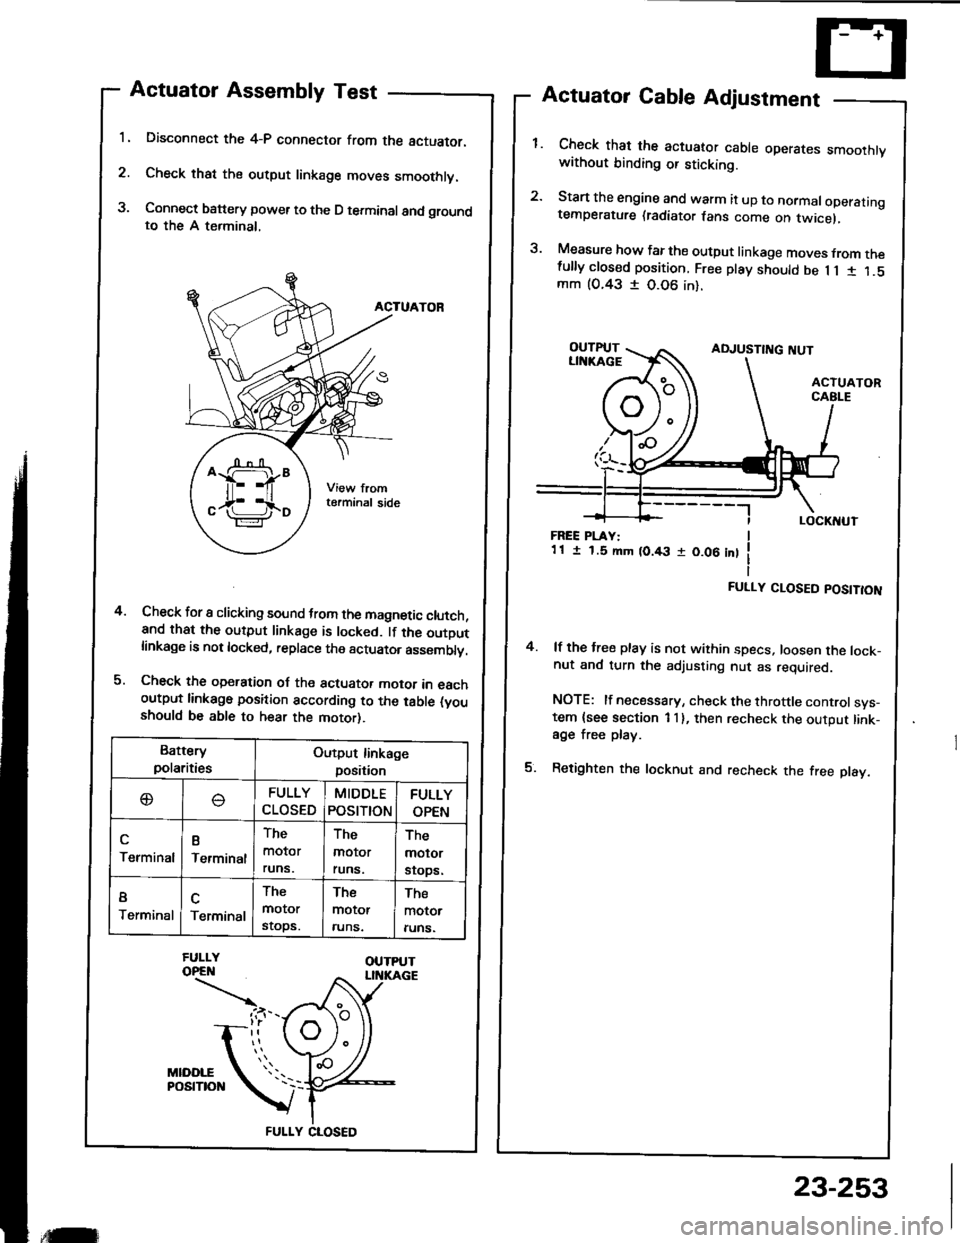 ACURA INTEGRA 1994  Service Workshop Manual 1.
2.
3.
Actuator Assembly Test
Disconnect the 4-P connector from the actuator.
Check that the output linkage moves smoothly.
Connect battery power to the D terminal and groundto the A terminal,
ACTUA